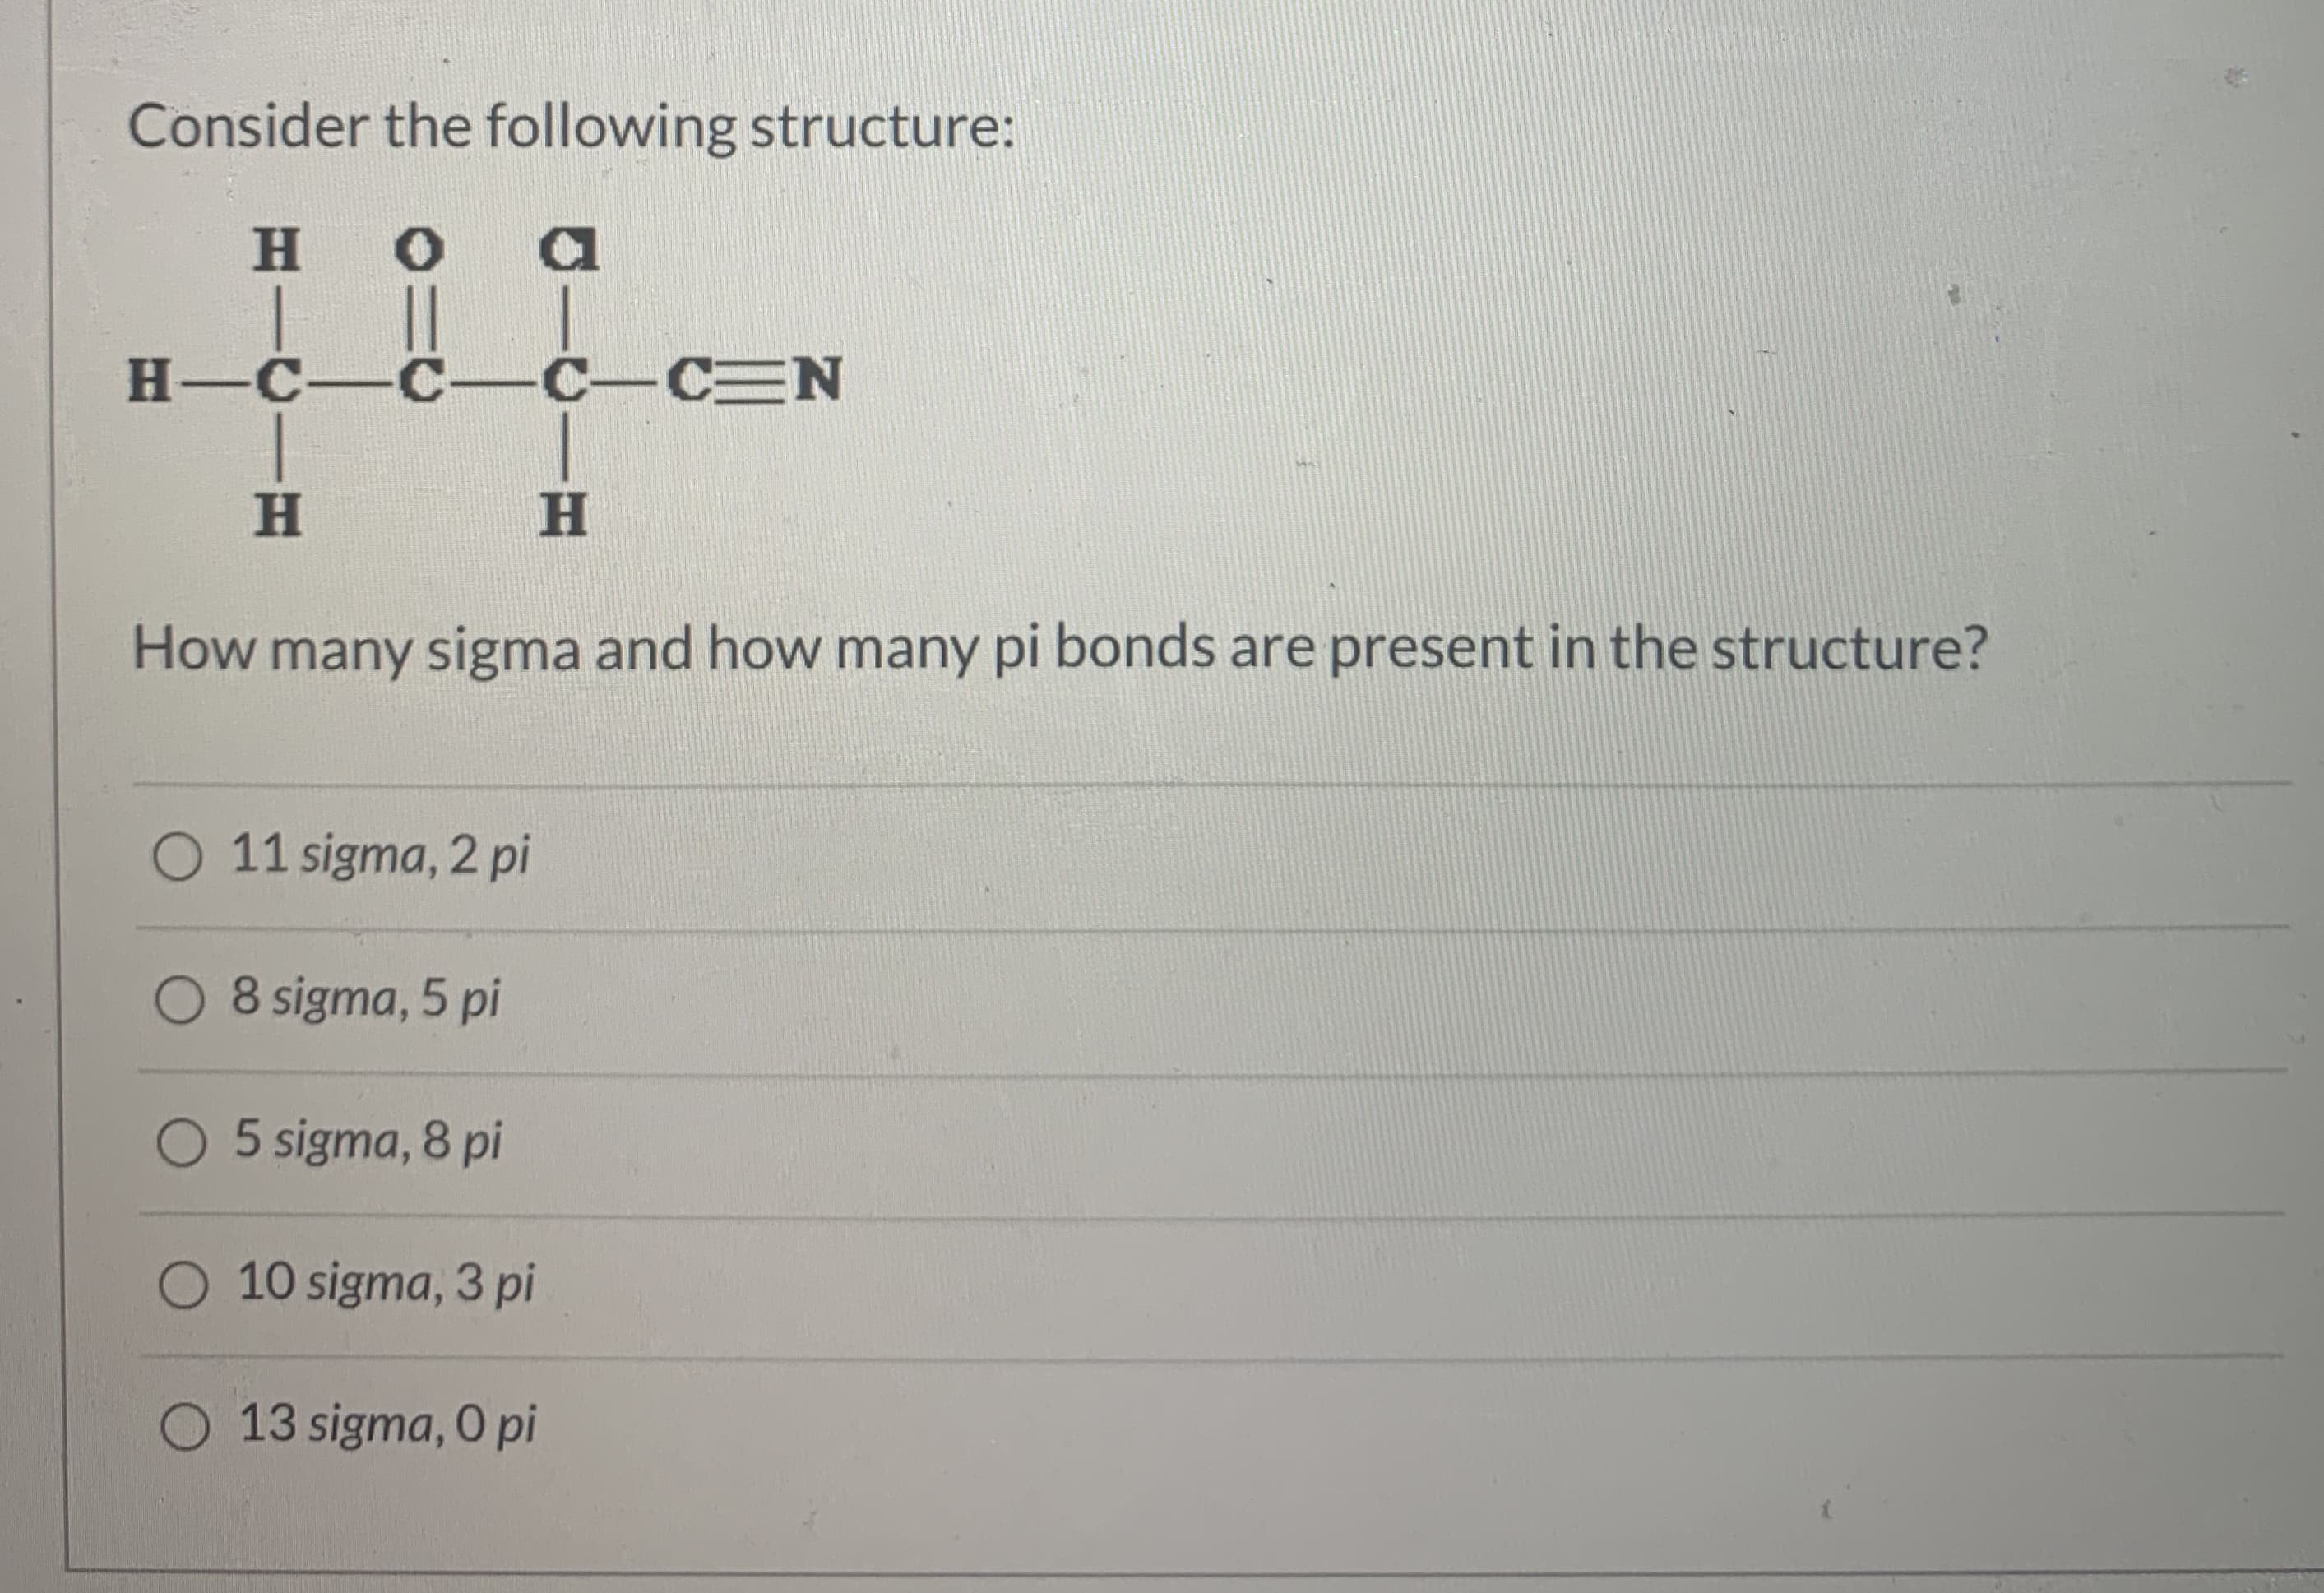 Consider the following structure:
H O
H-C-C- C-CEN
H.
H
How many sigma and how many pi bonds are present in the structure?
